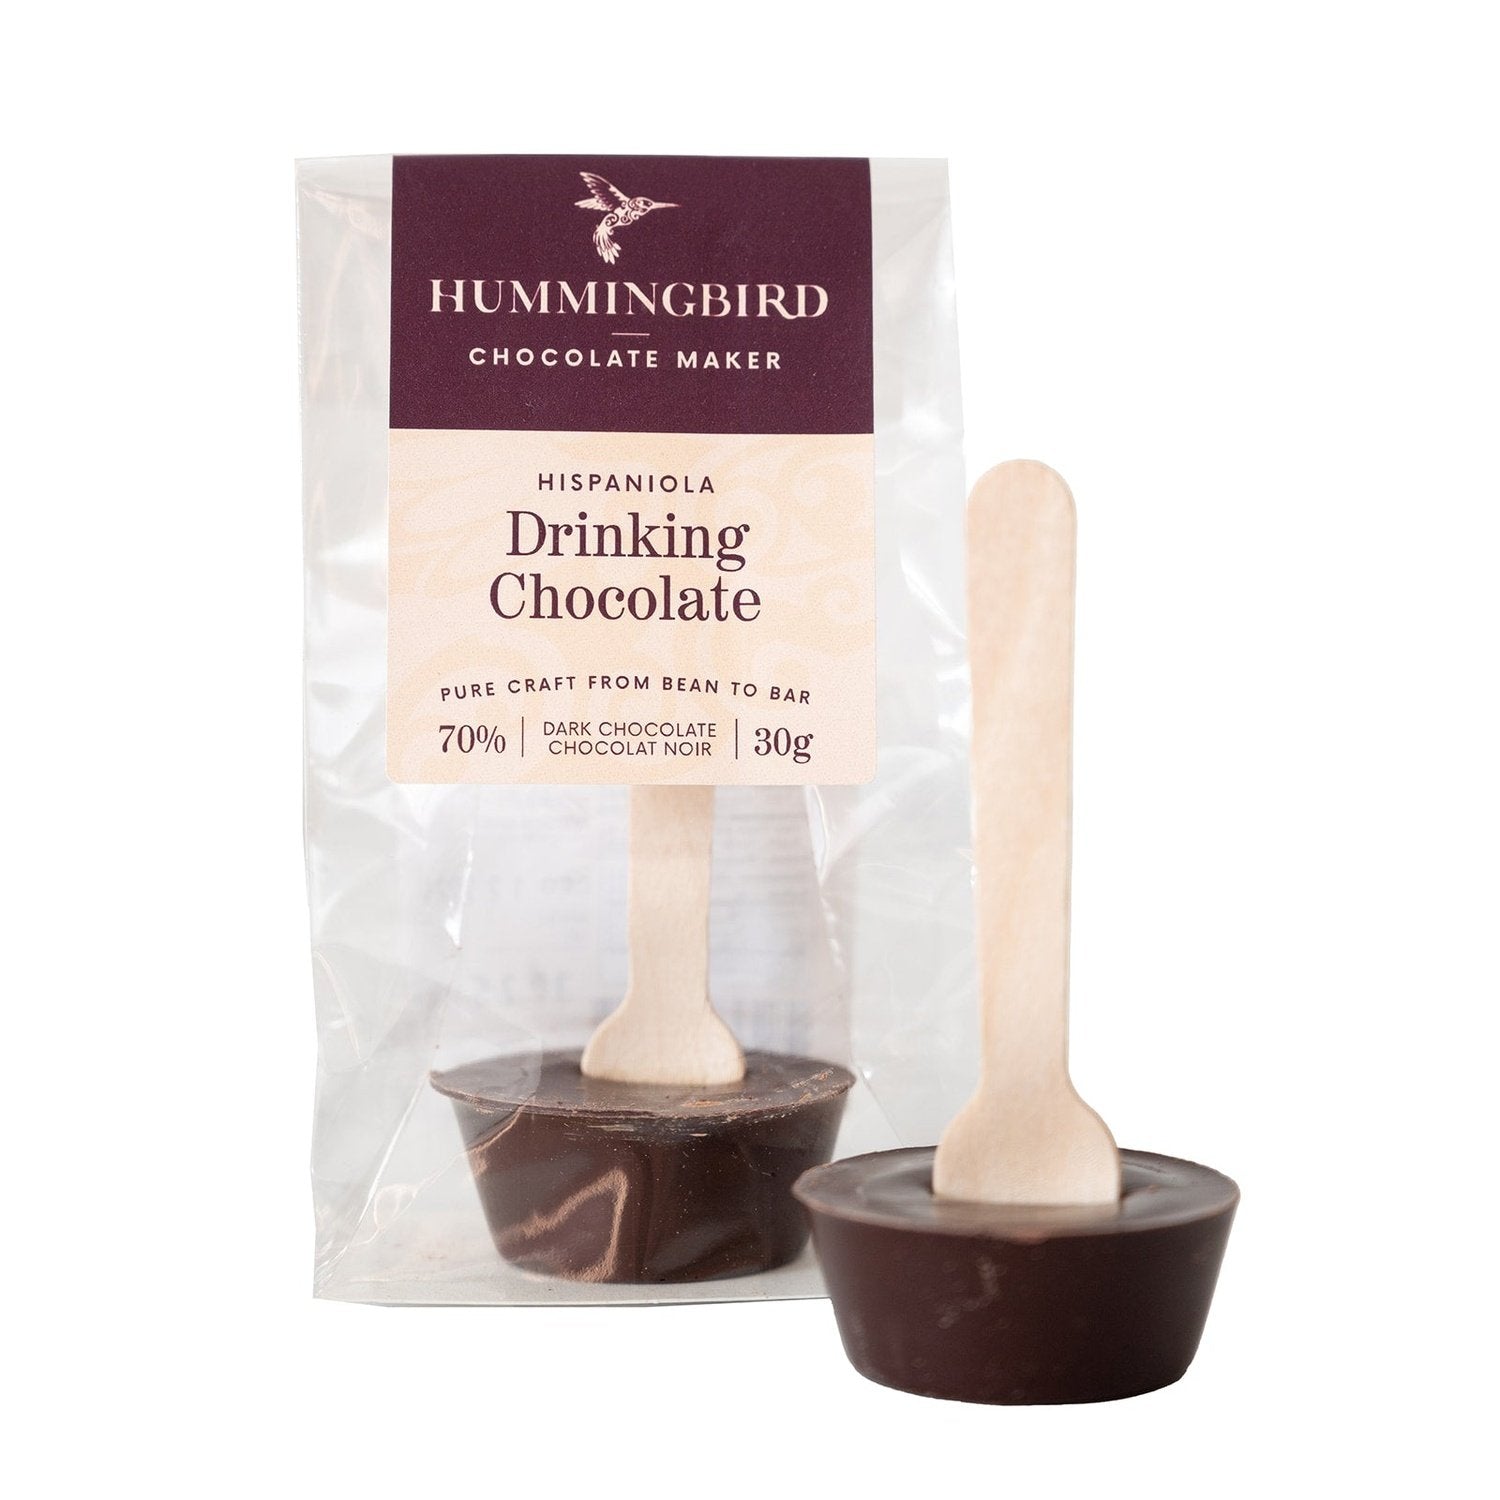 Two drinking chocolate spoons, in and out of packaging, made with bean to bar single origin dark chocolate